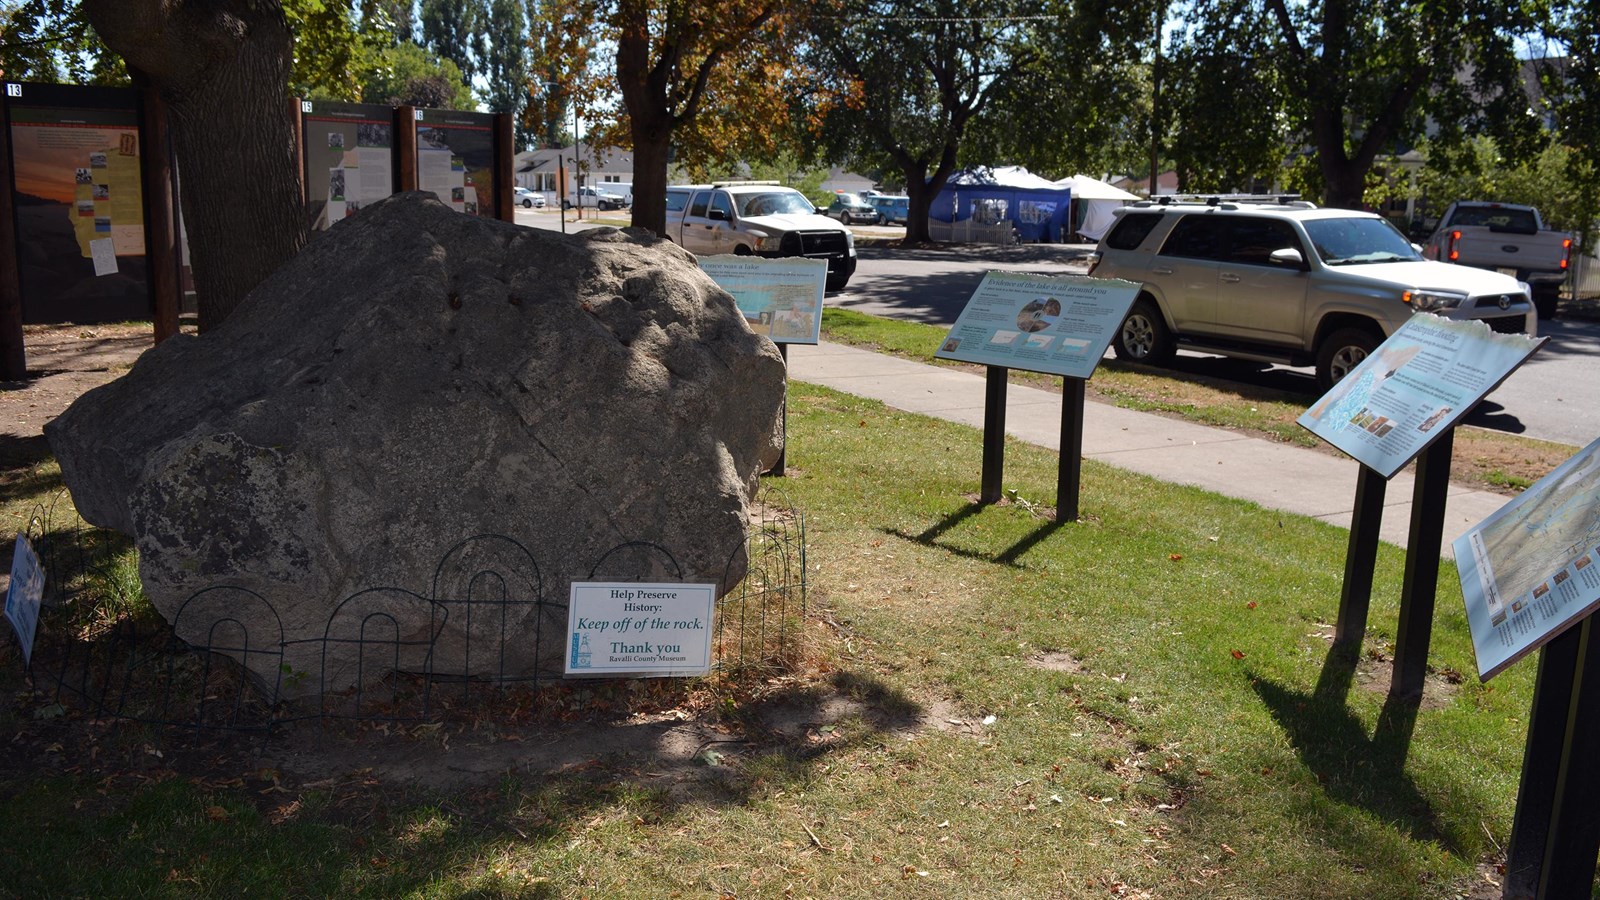 an erratic boulder and several wayside exhibits about floods under a tree outside.